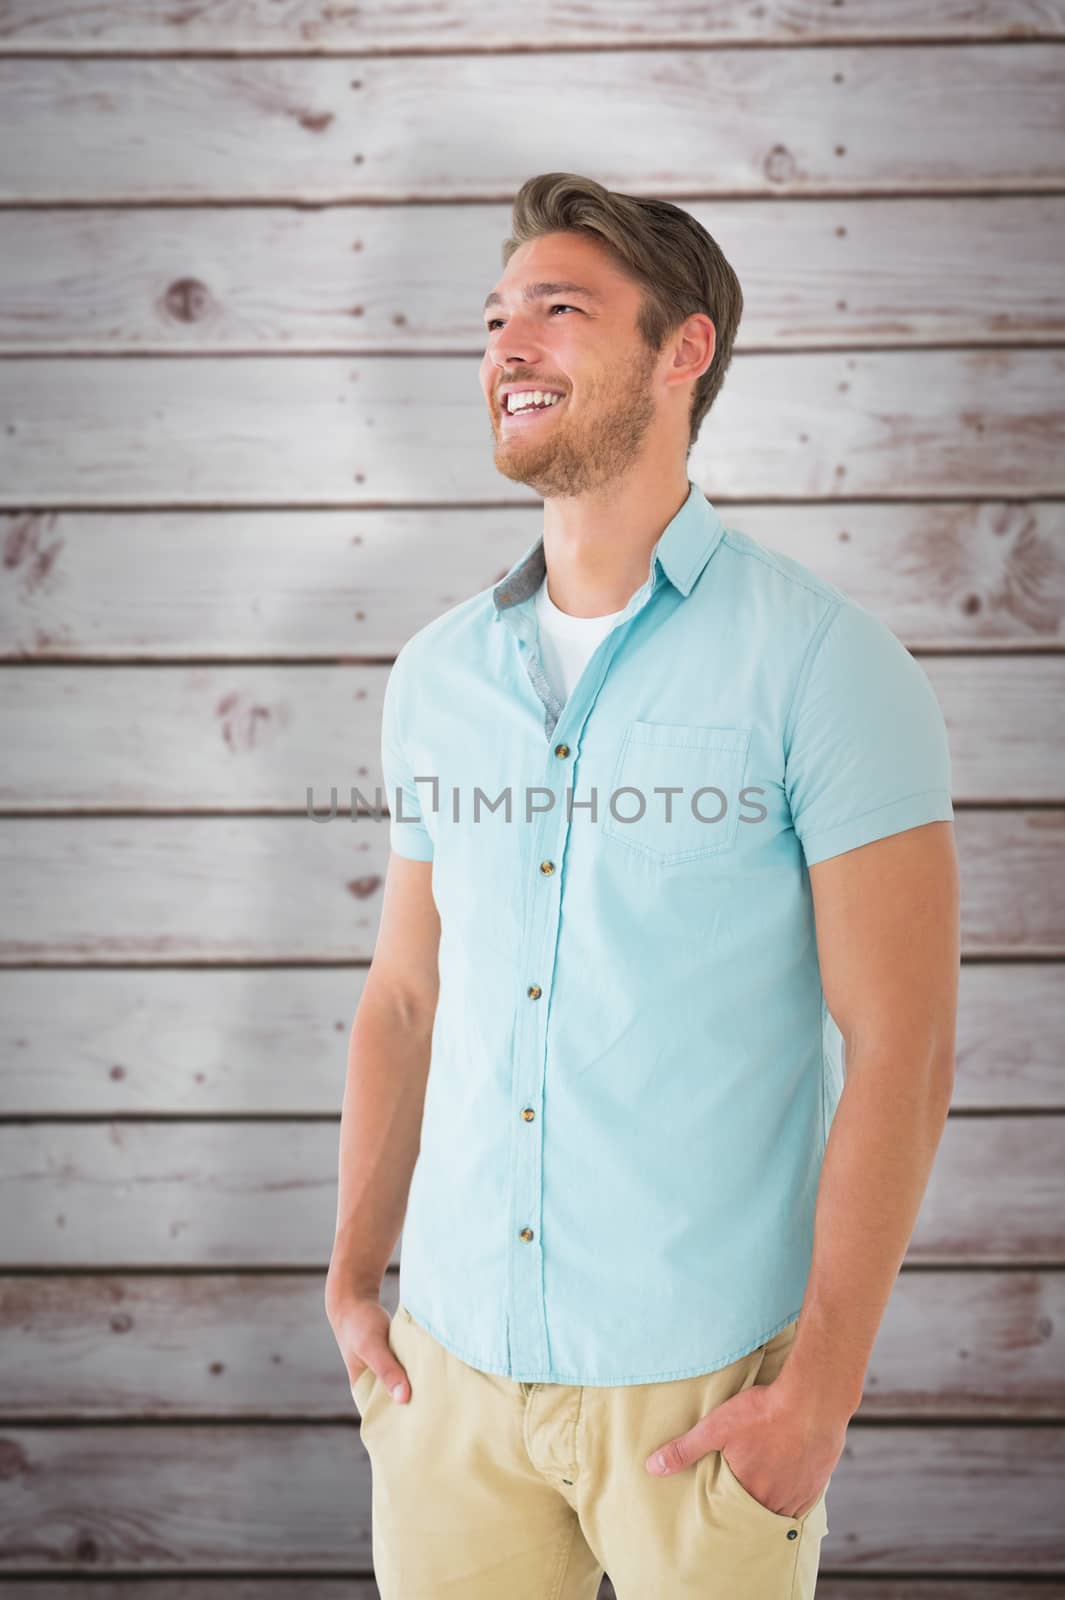 Handsome young man posing with hands in pockets against wooden planks